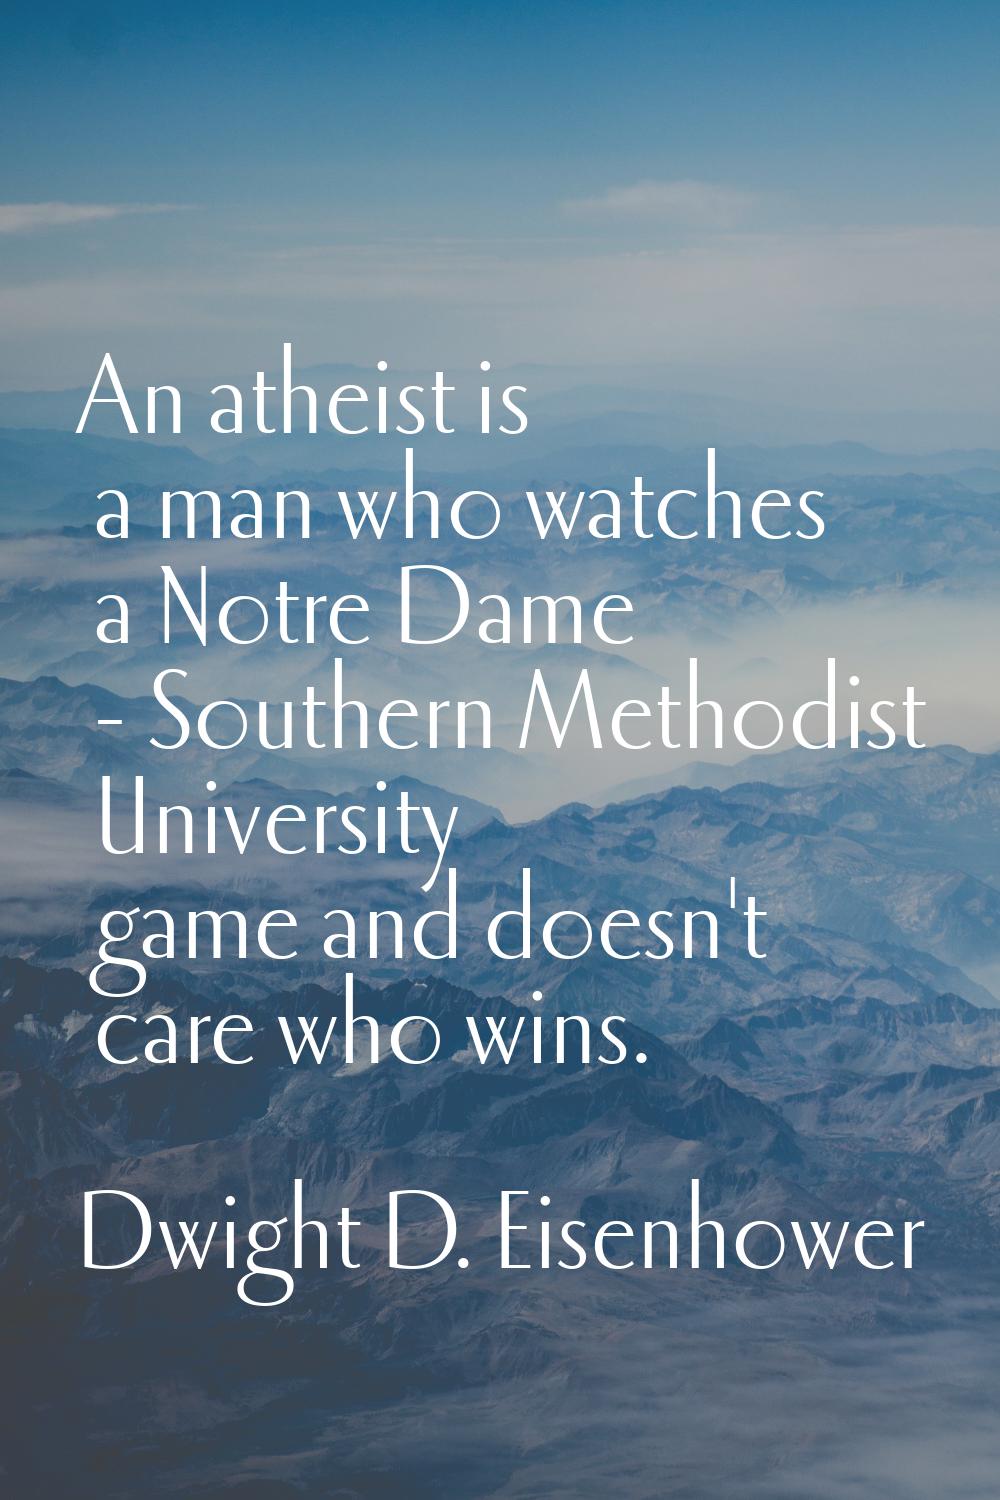 An atheist is a man who watches a Notre Dame - Southern Methodist University game and doesn't care 